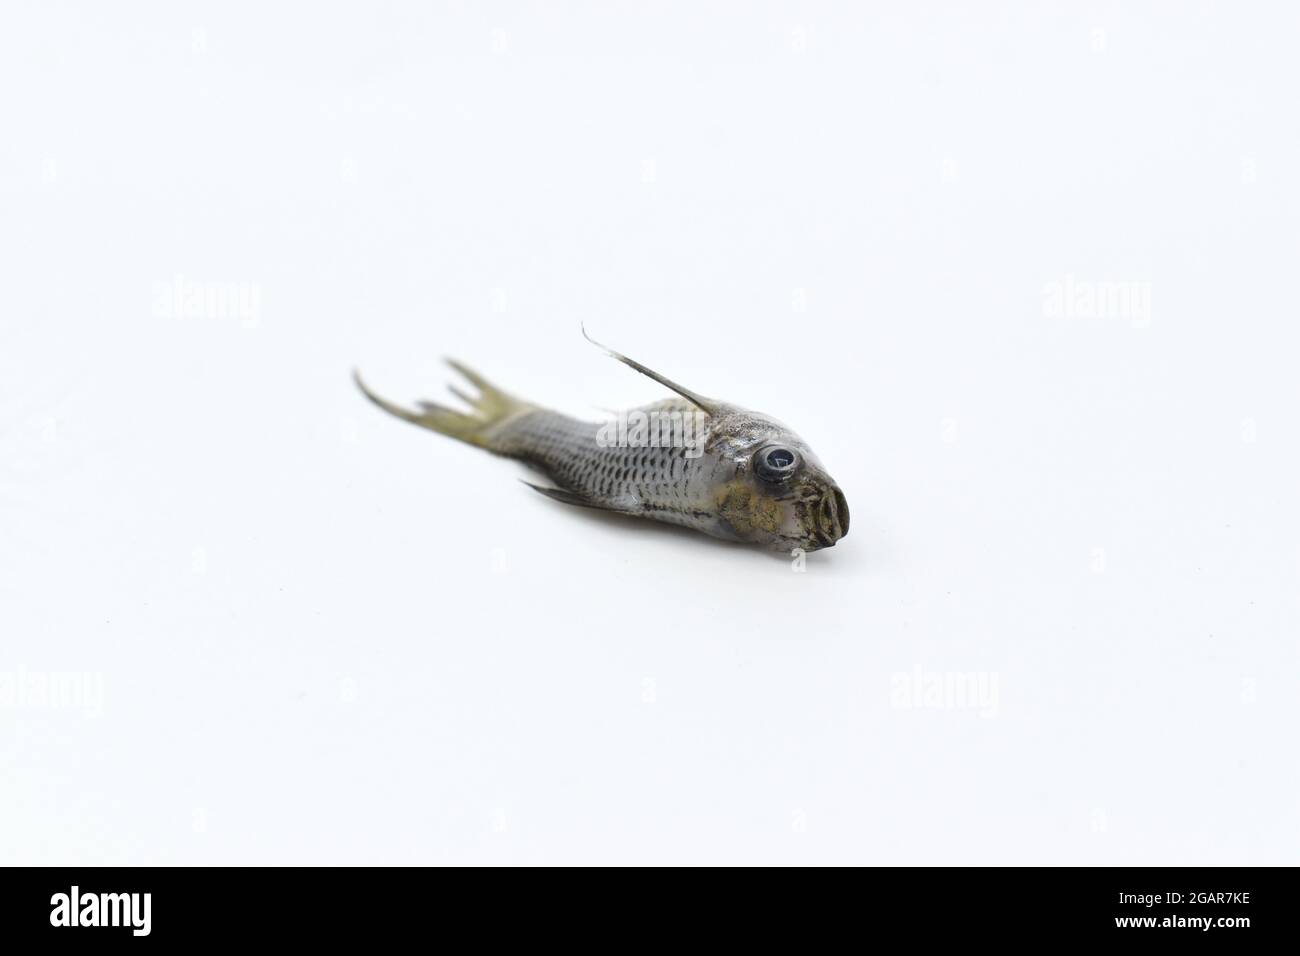 Gray dwarf molly fish died due to poor water quality i.e. ammonia poisoning. Stock Photo